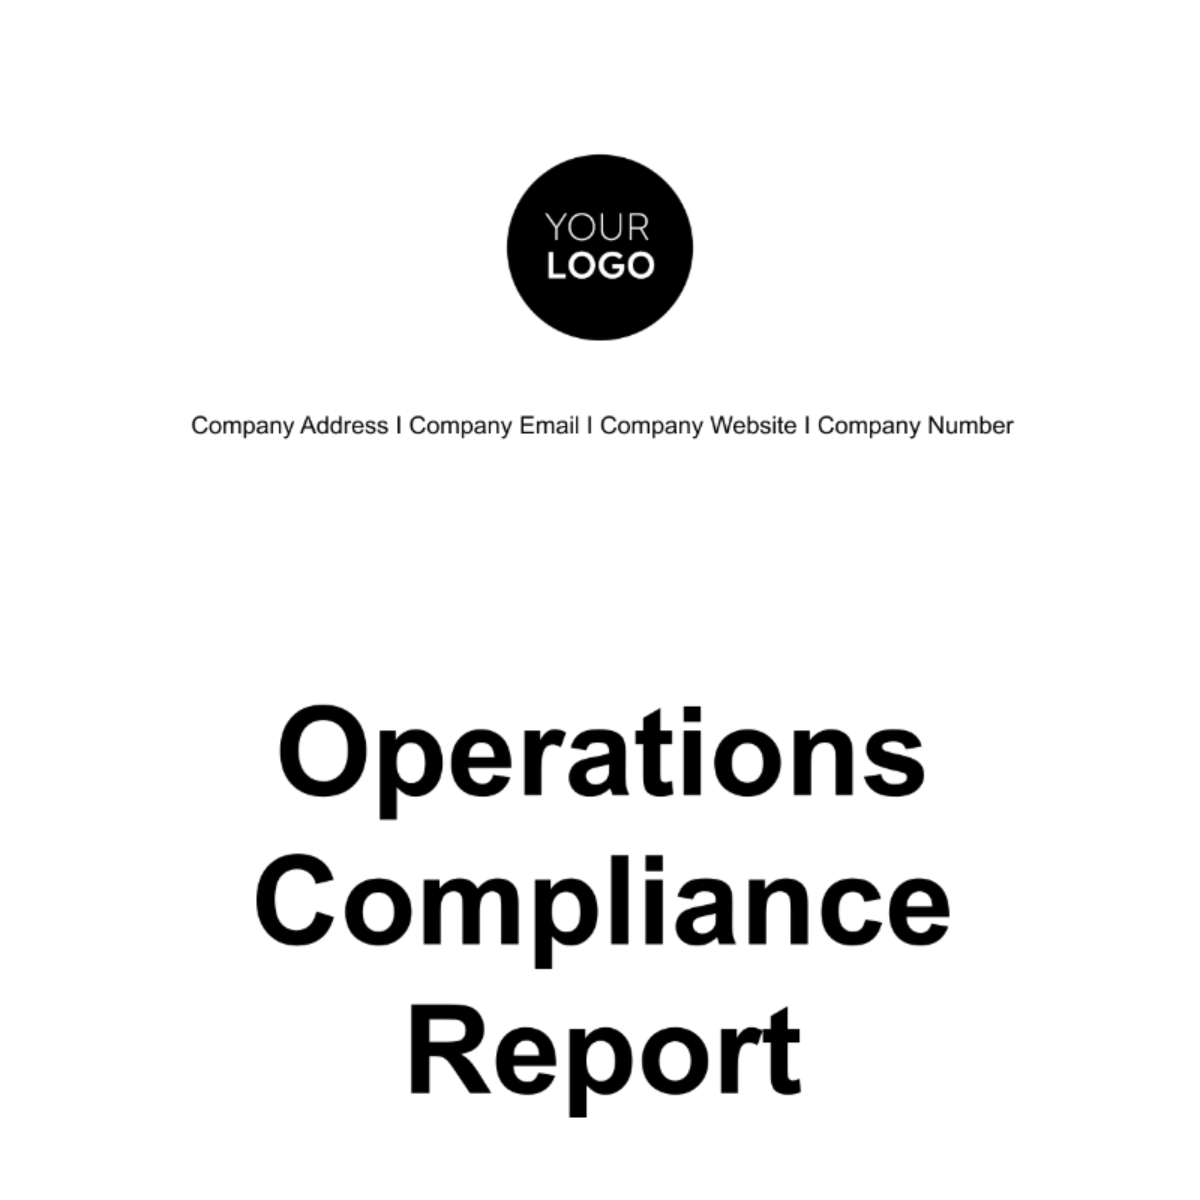 Operations Compliance Report Template